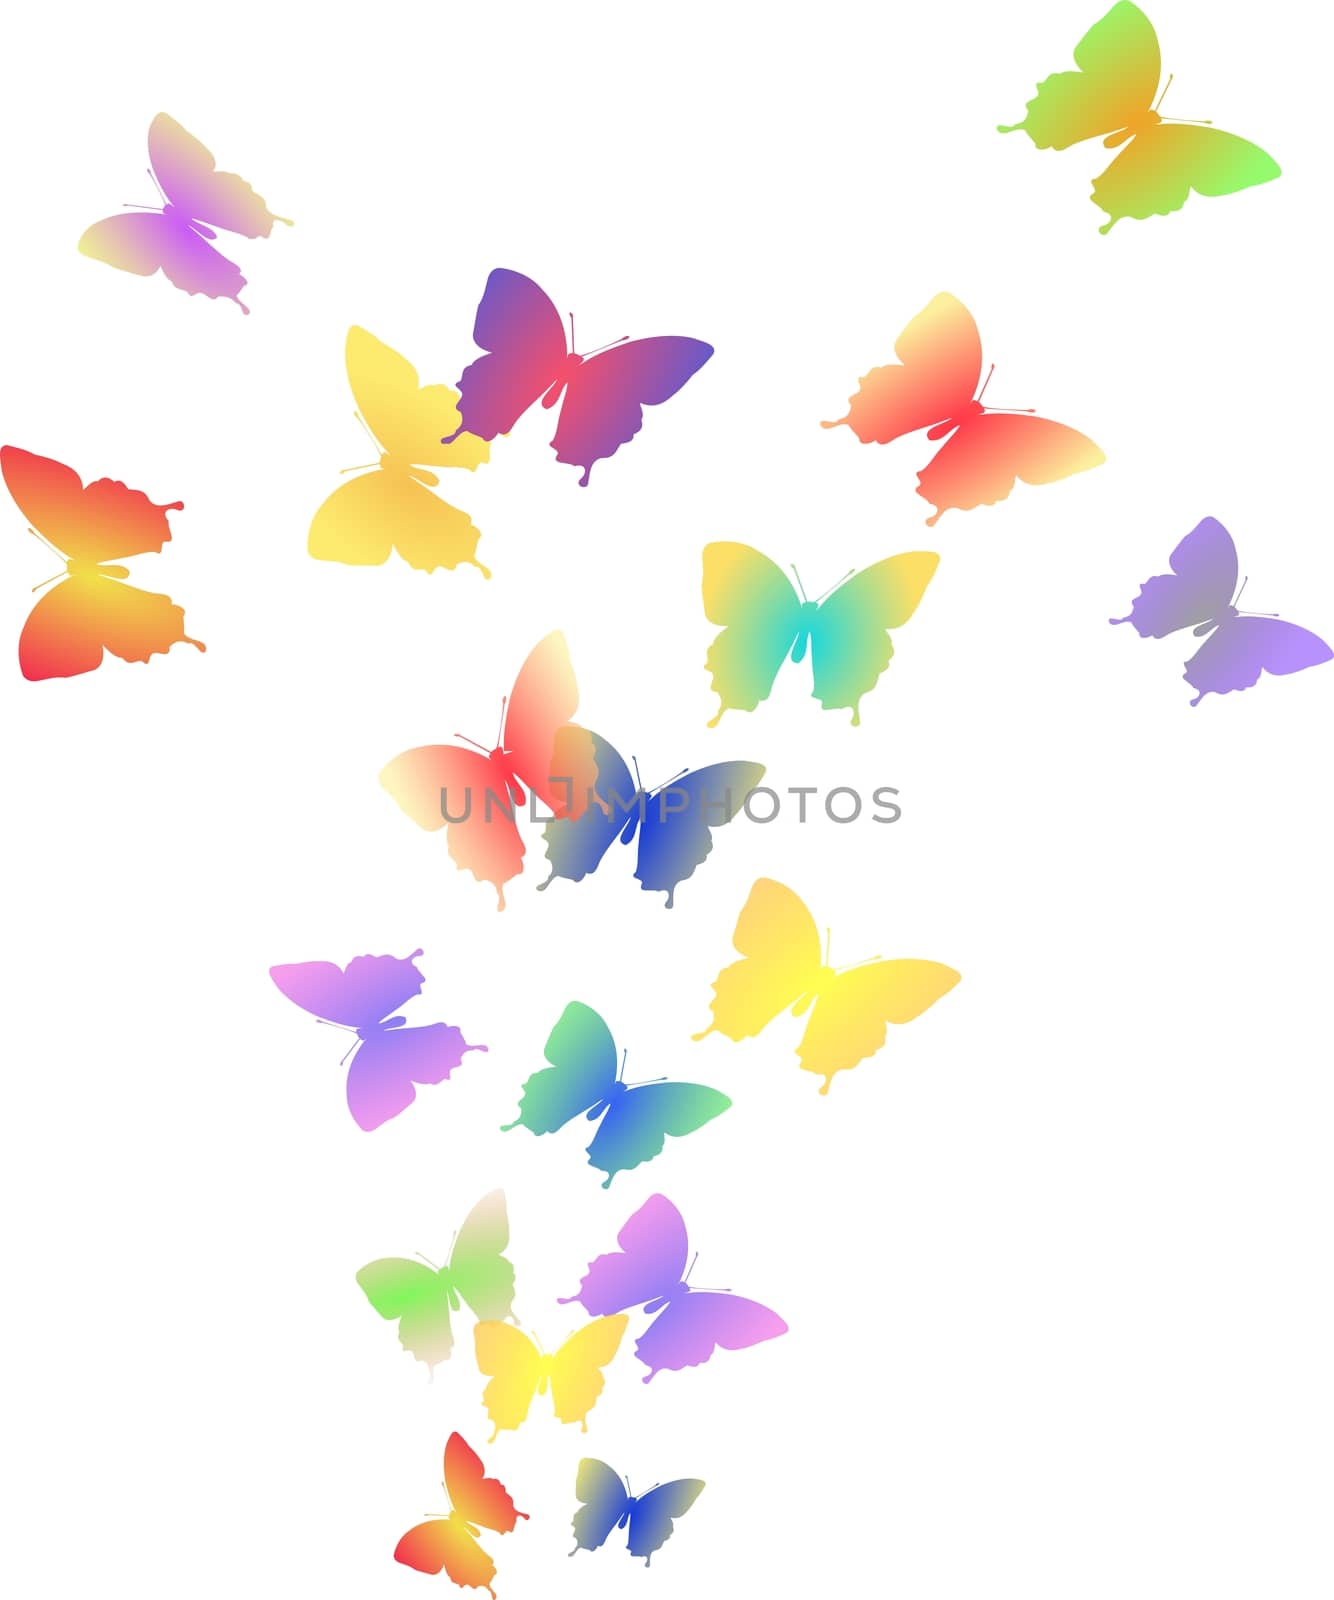 Illustration of flock of colorful butterflies isolated on a white background